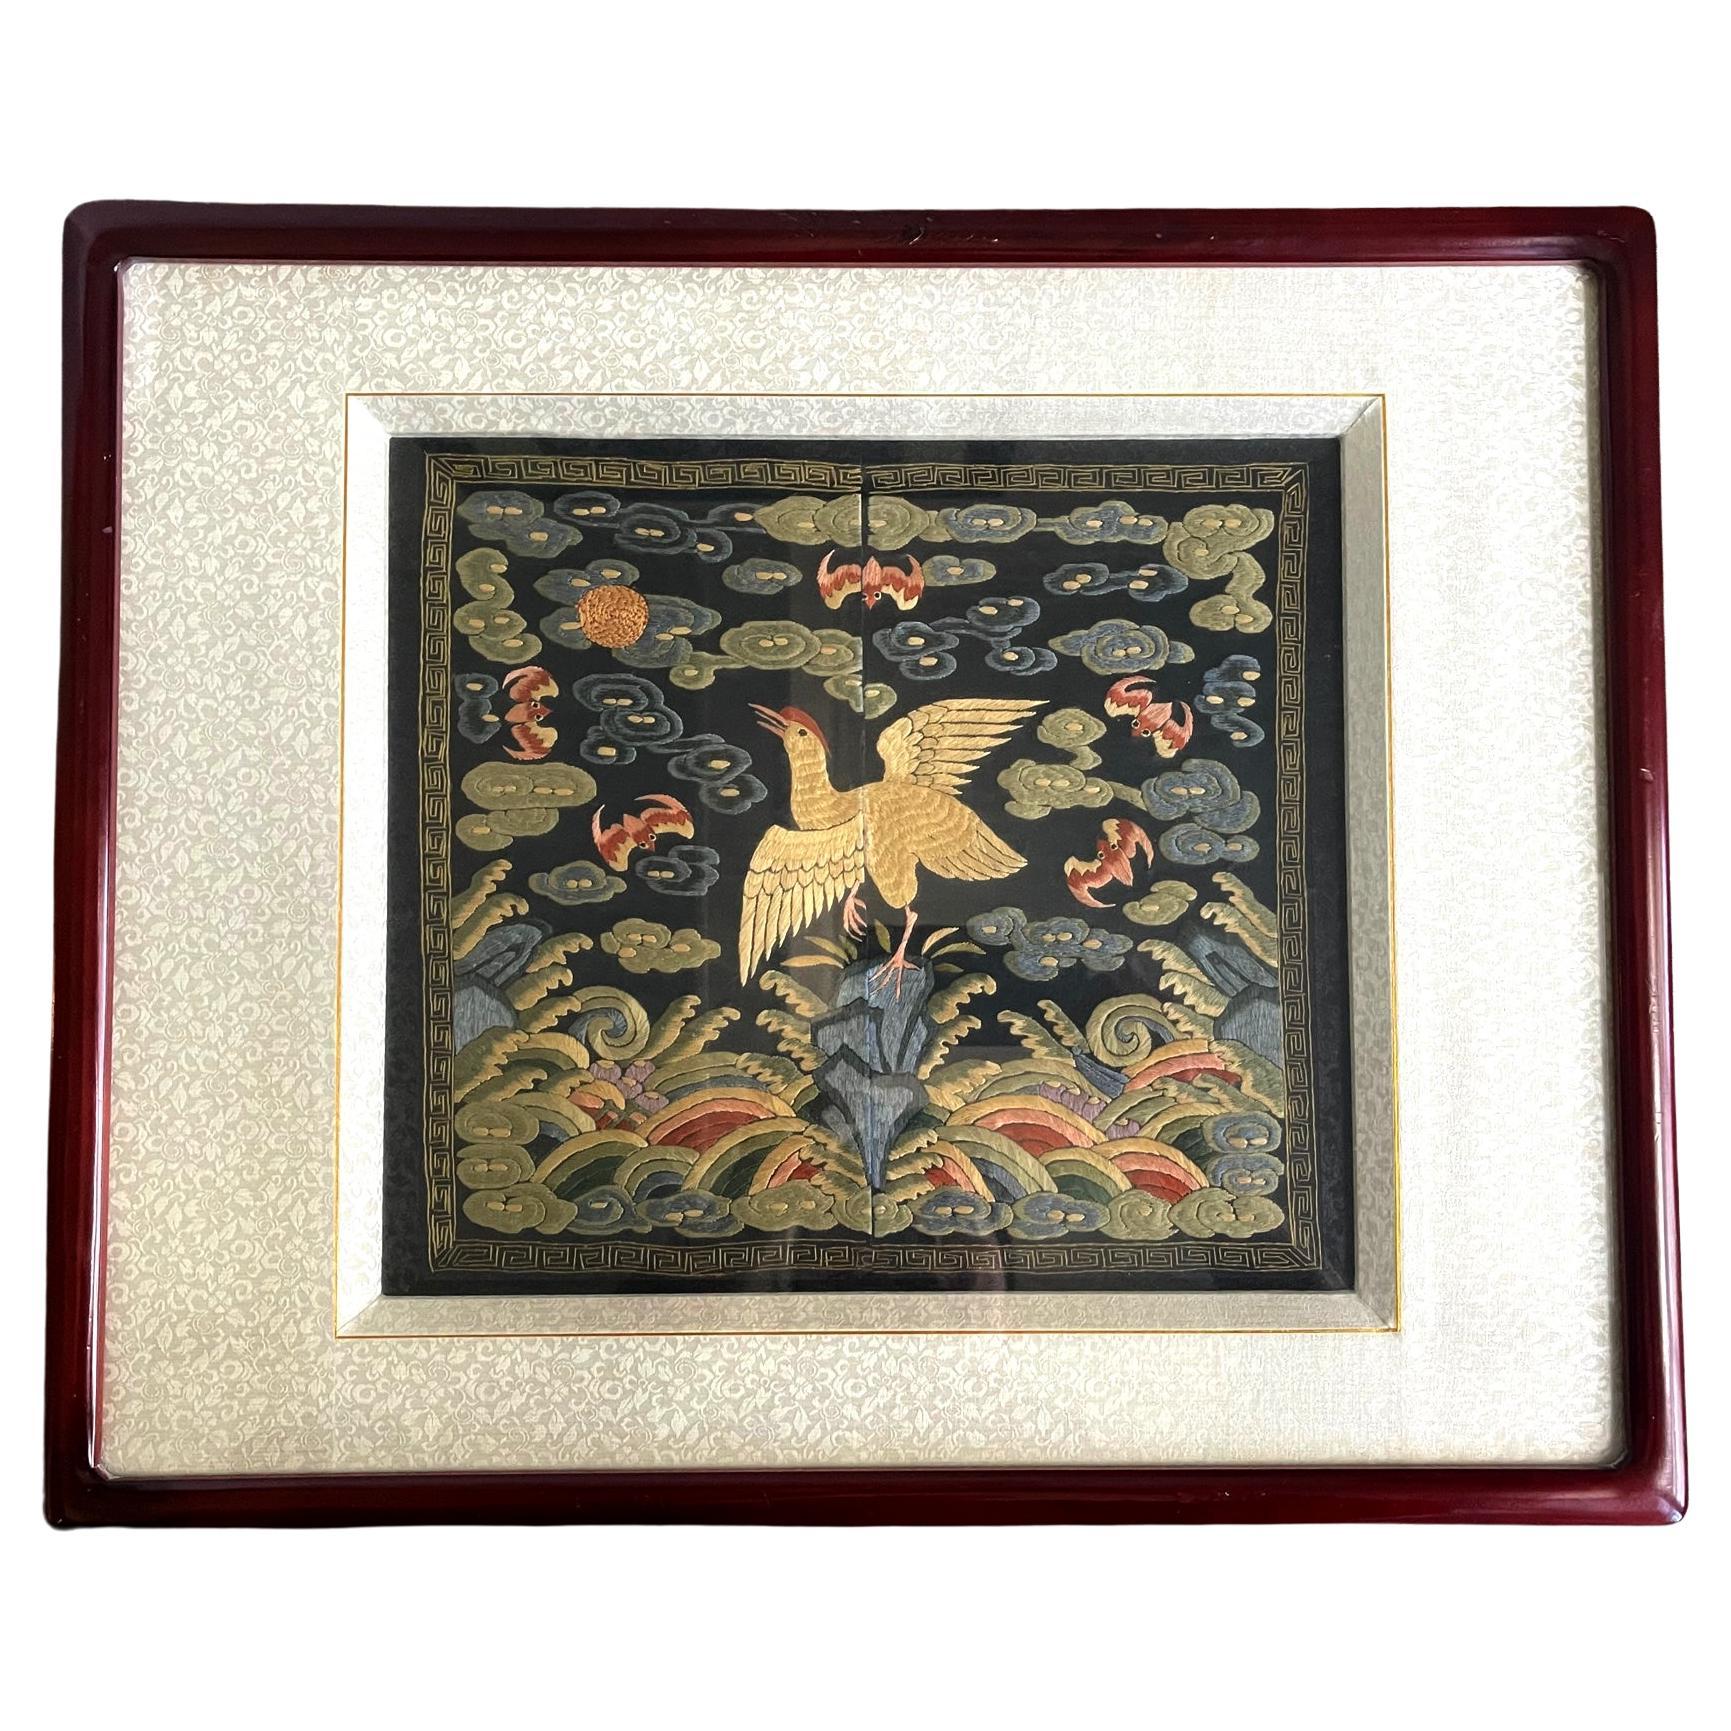 Framed Chinese Qing Dynasty Embroidered Sixth Rank Badge For Sale